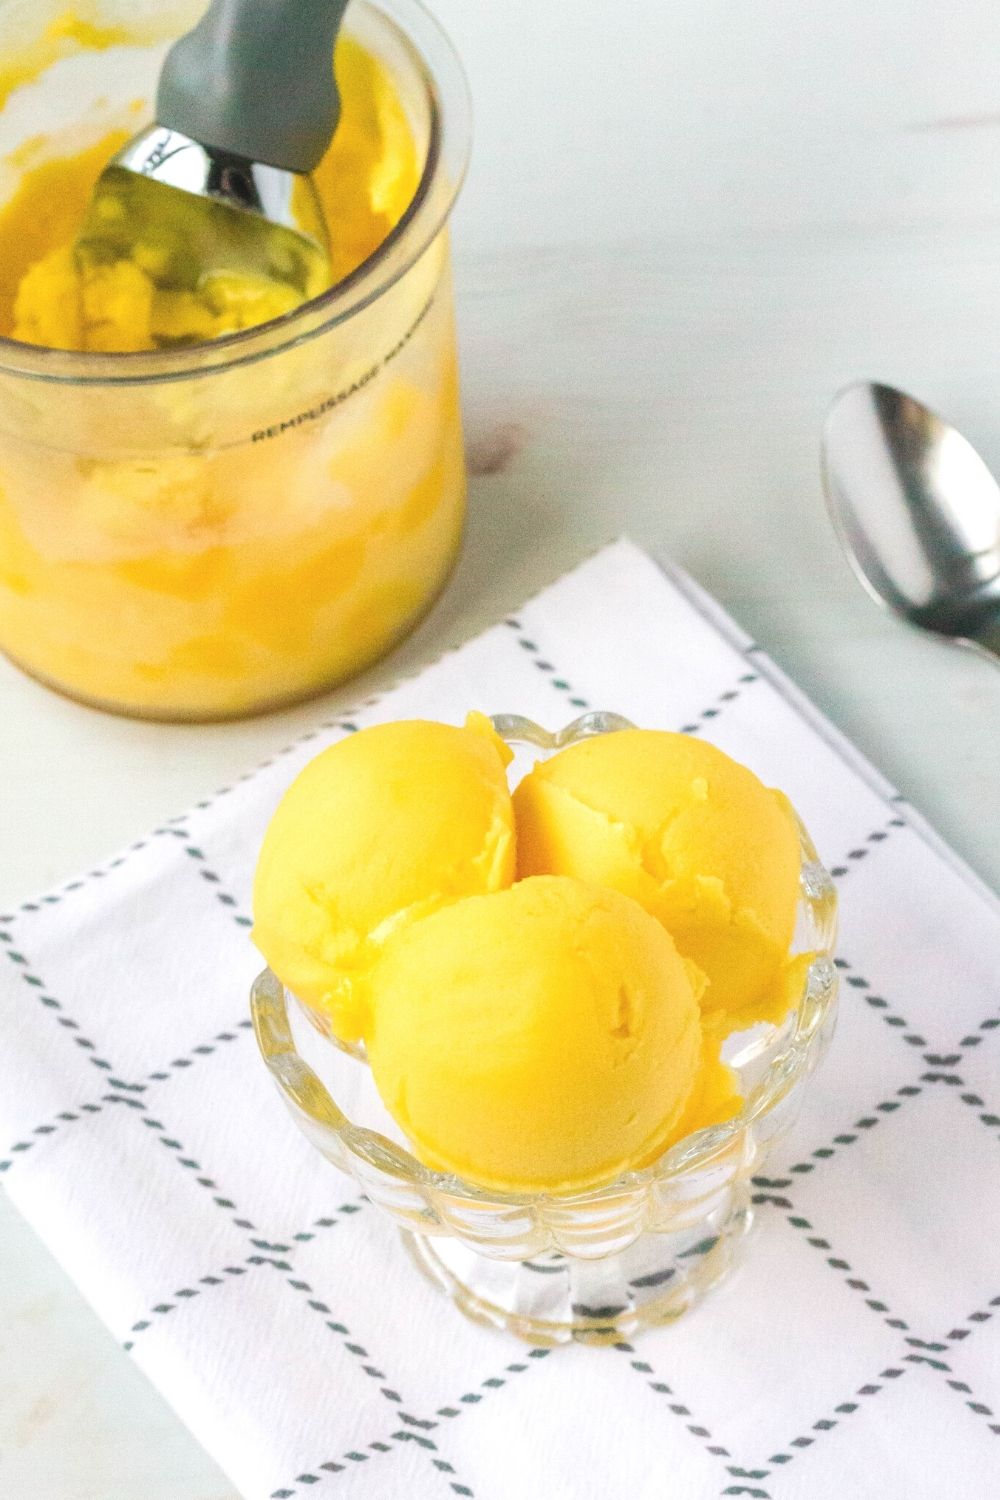 three scoops of mango sorbet made in the ninja creami are served in a glass dish. A pint container is in the background.